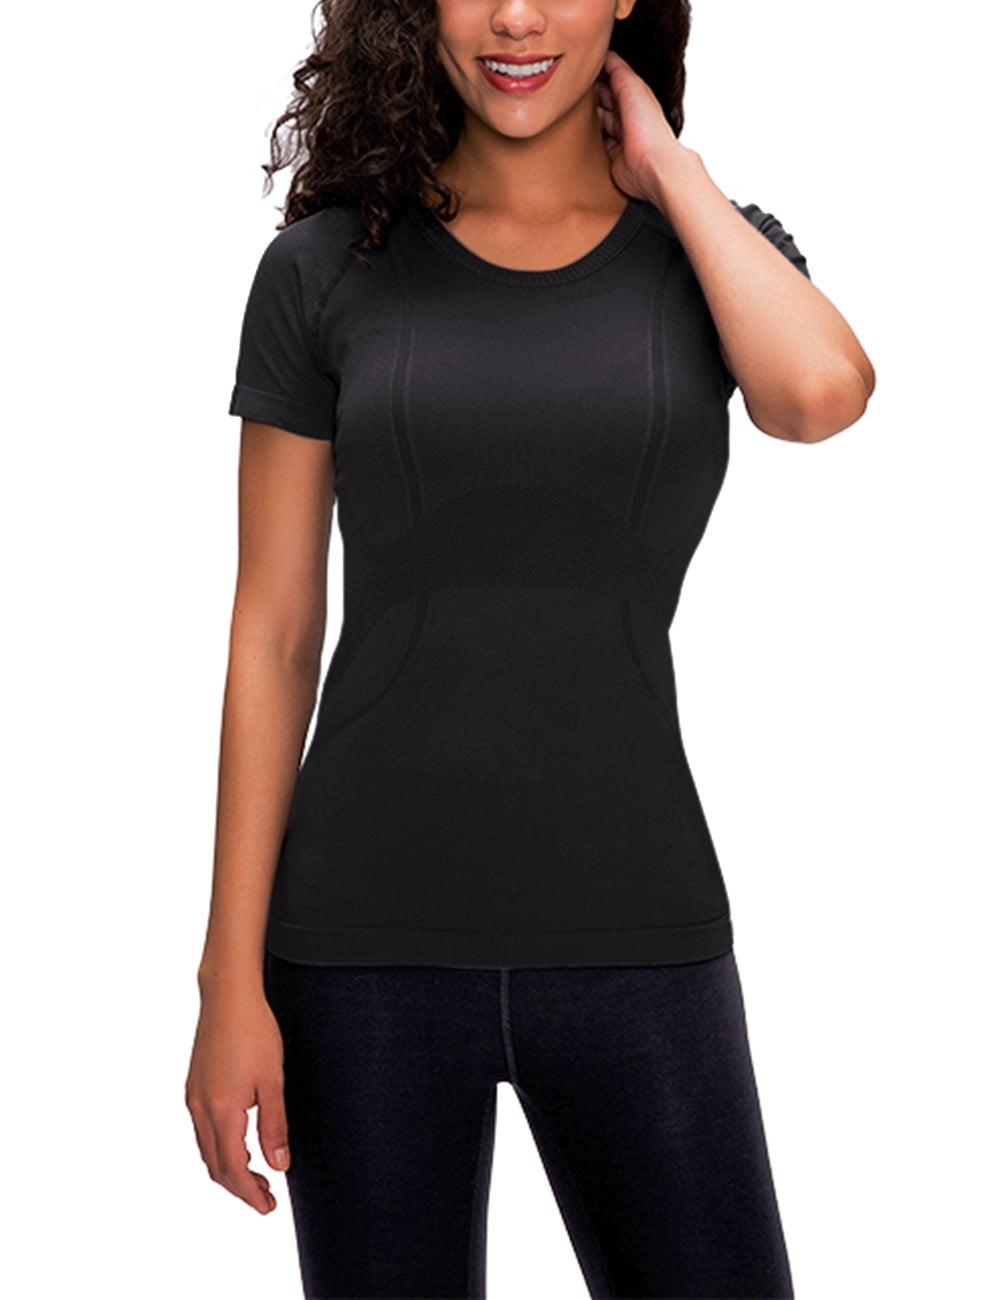 Buy Women's Gym T-shirts Online From 500+ Options At Best Prices